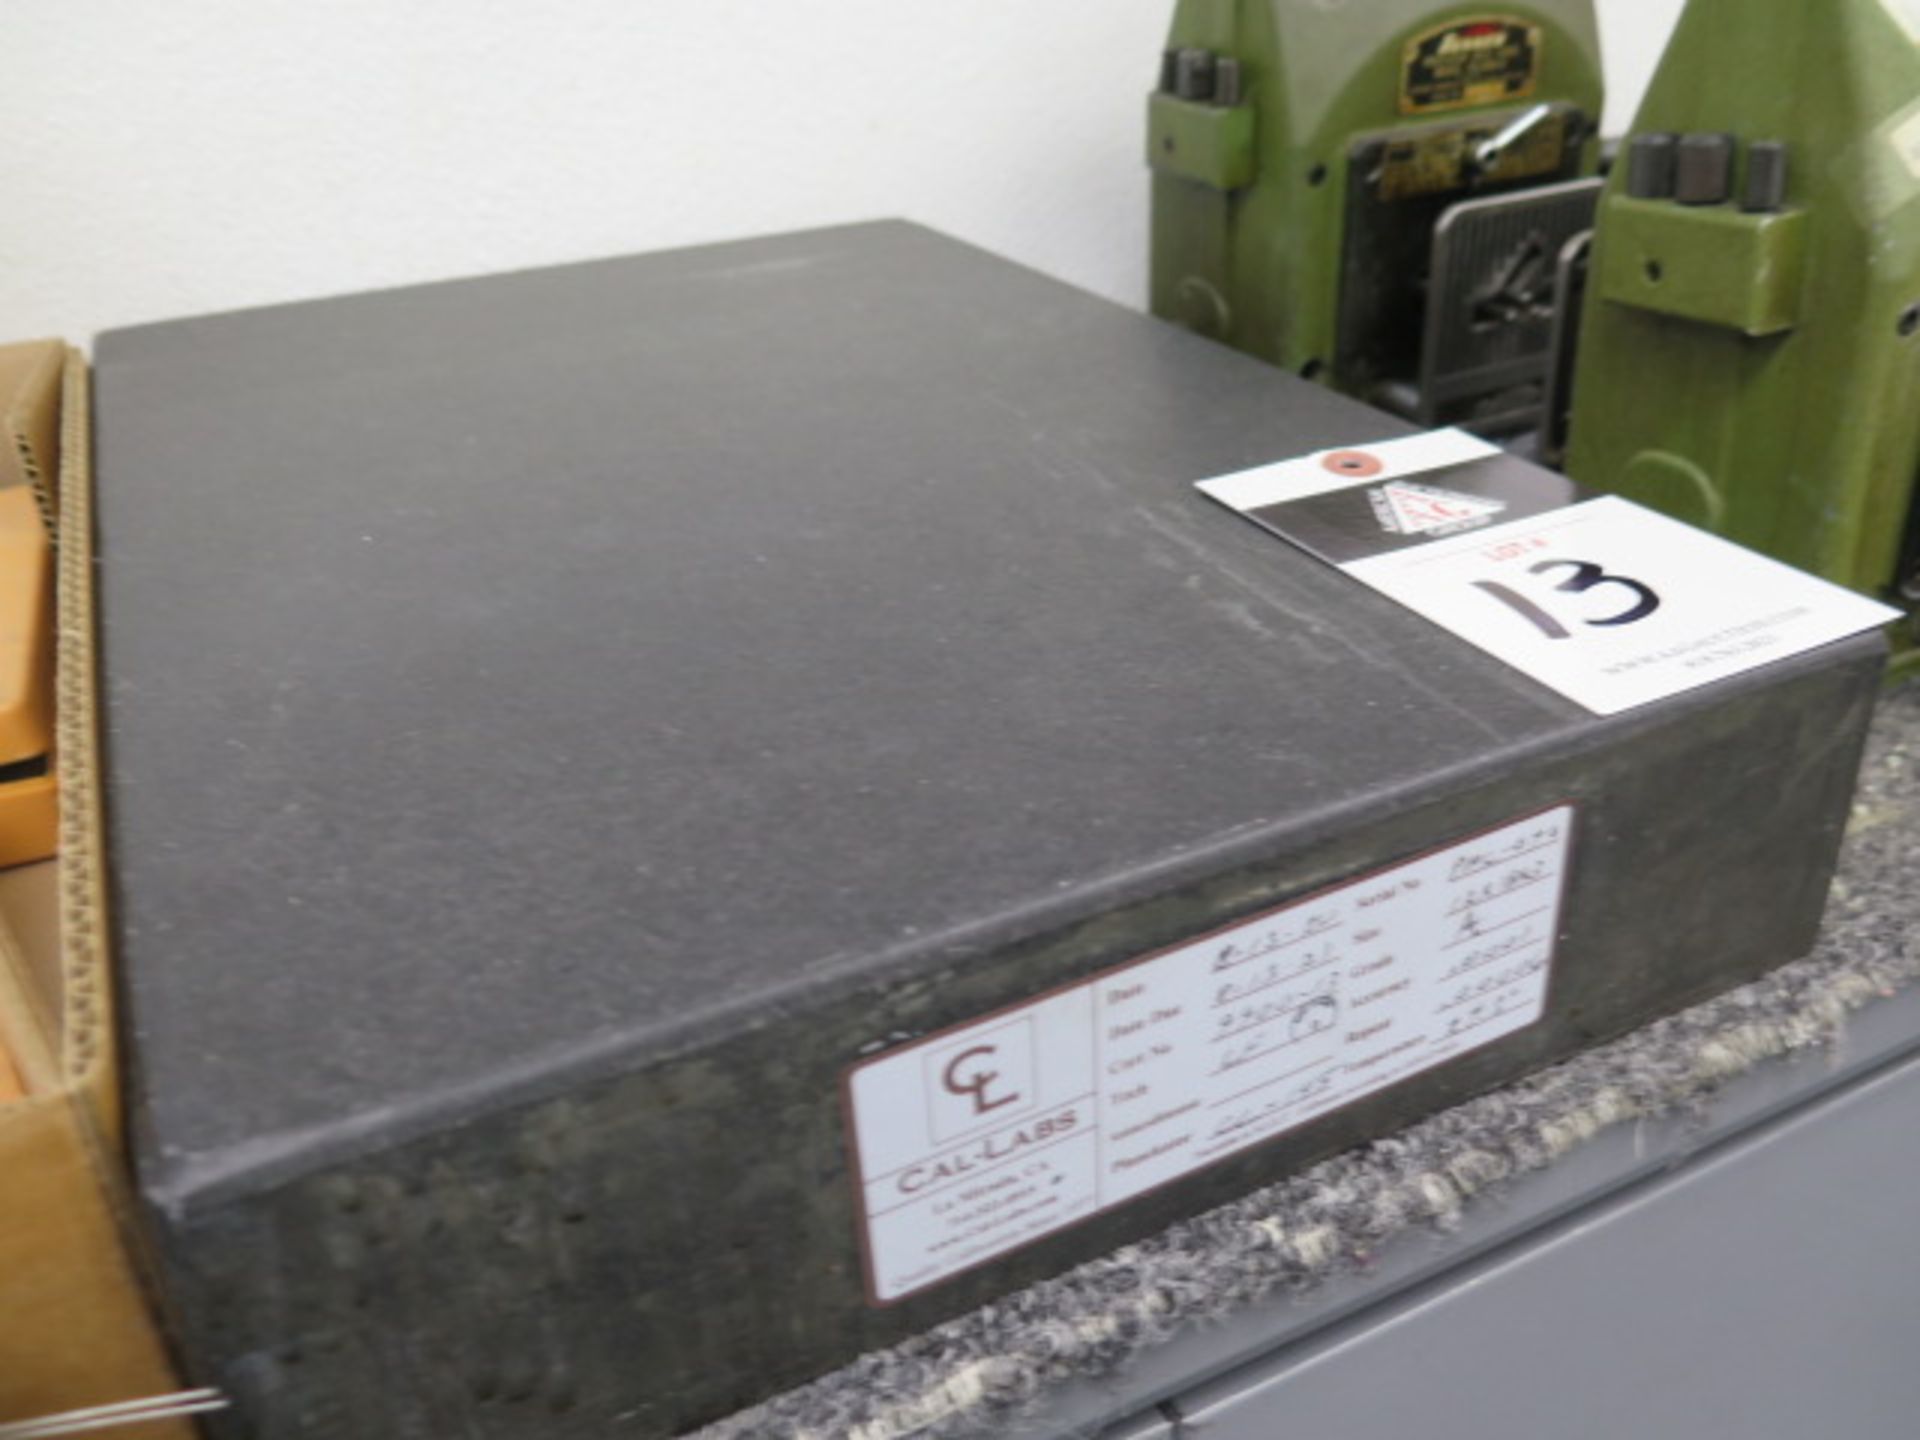 12" x 18" x 3" Granite Surface Plate (SOLD AS-IS - NO WARRANTY) - Image 2 of 3